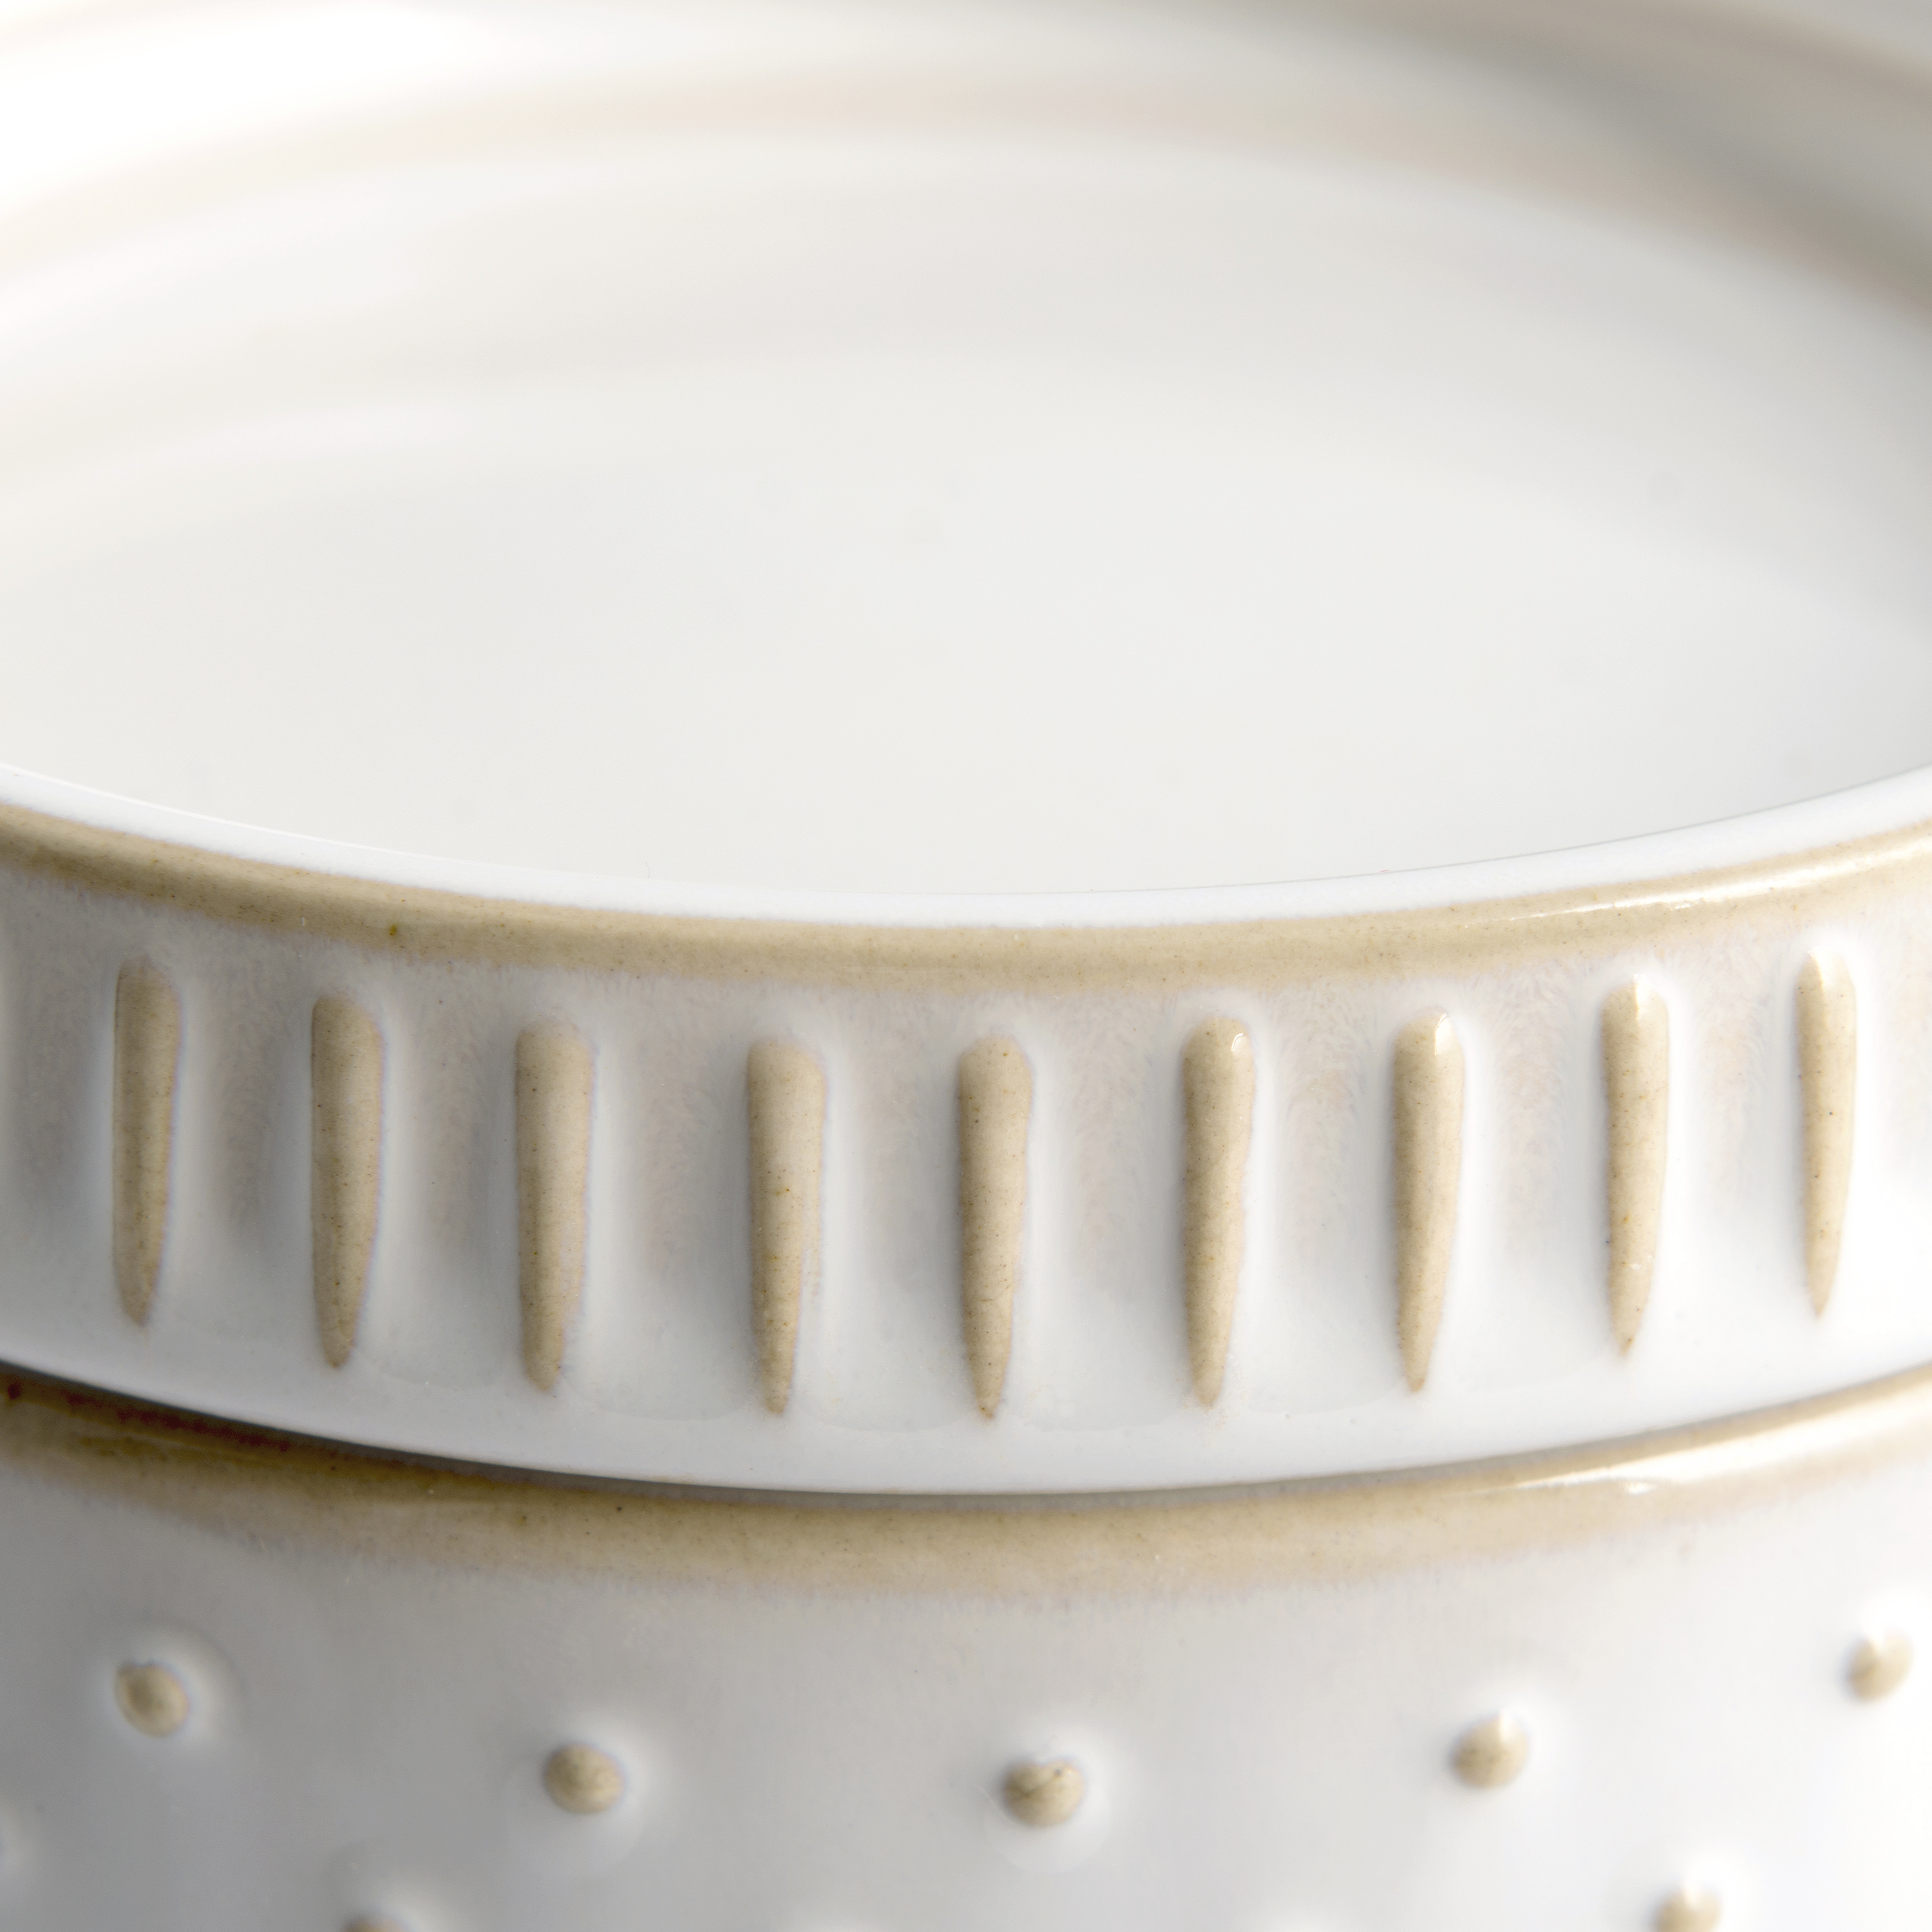 3-Piece Textured Ceramic Stackable Jar Set in Creamy White, Better Homes & Gardens - image 3 of 8